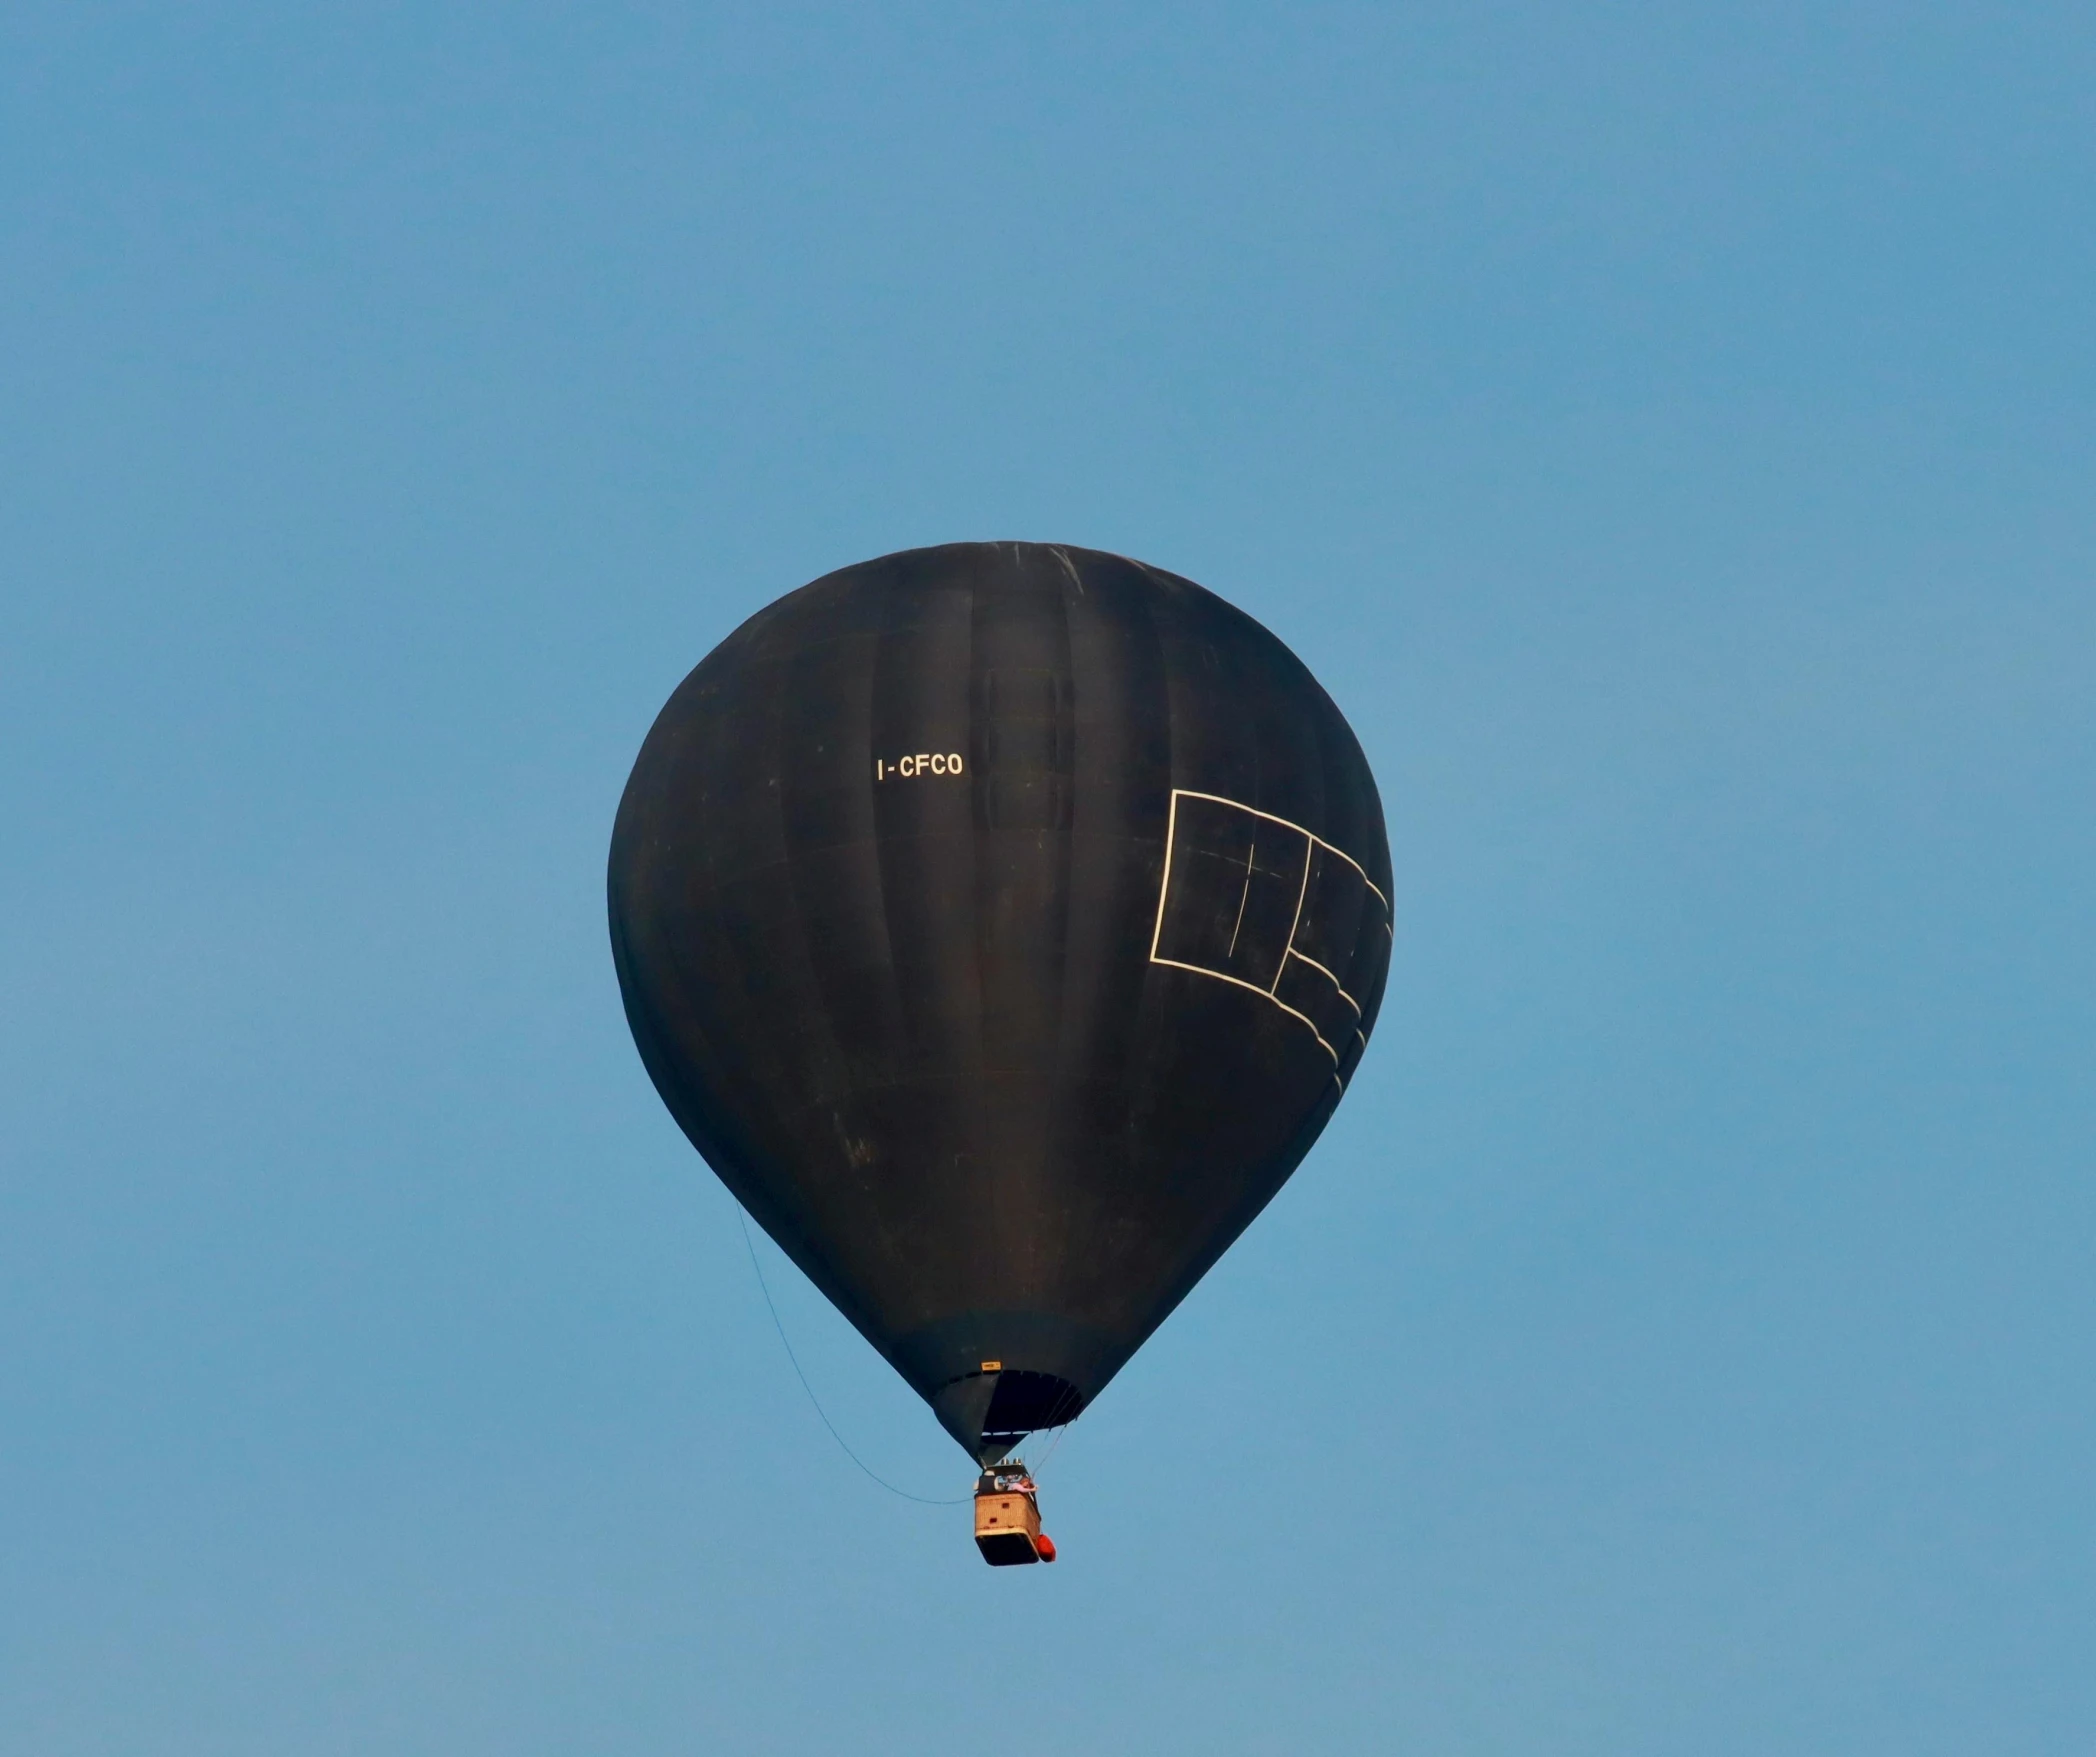 an image of a black balloon flying in the sky